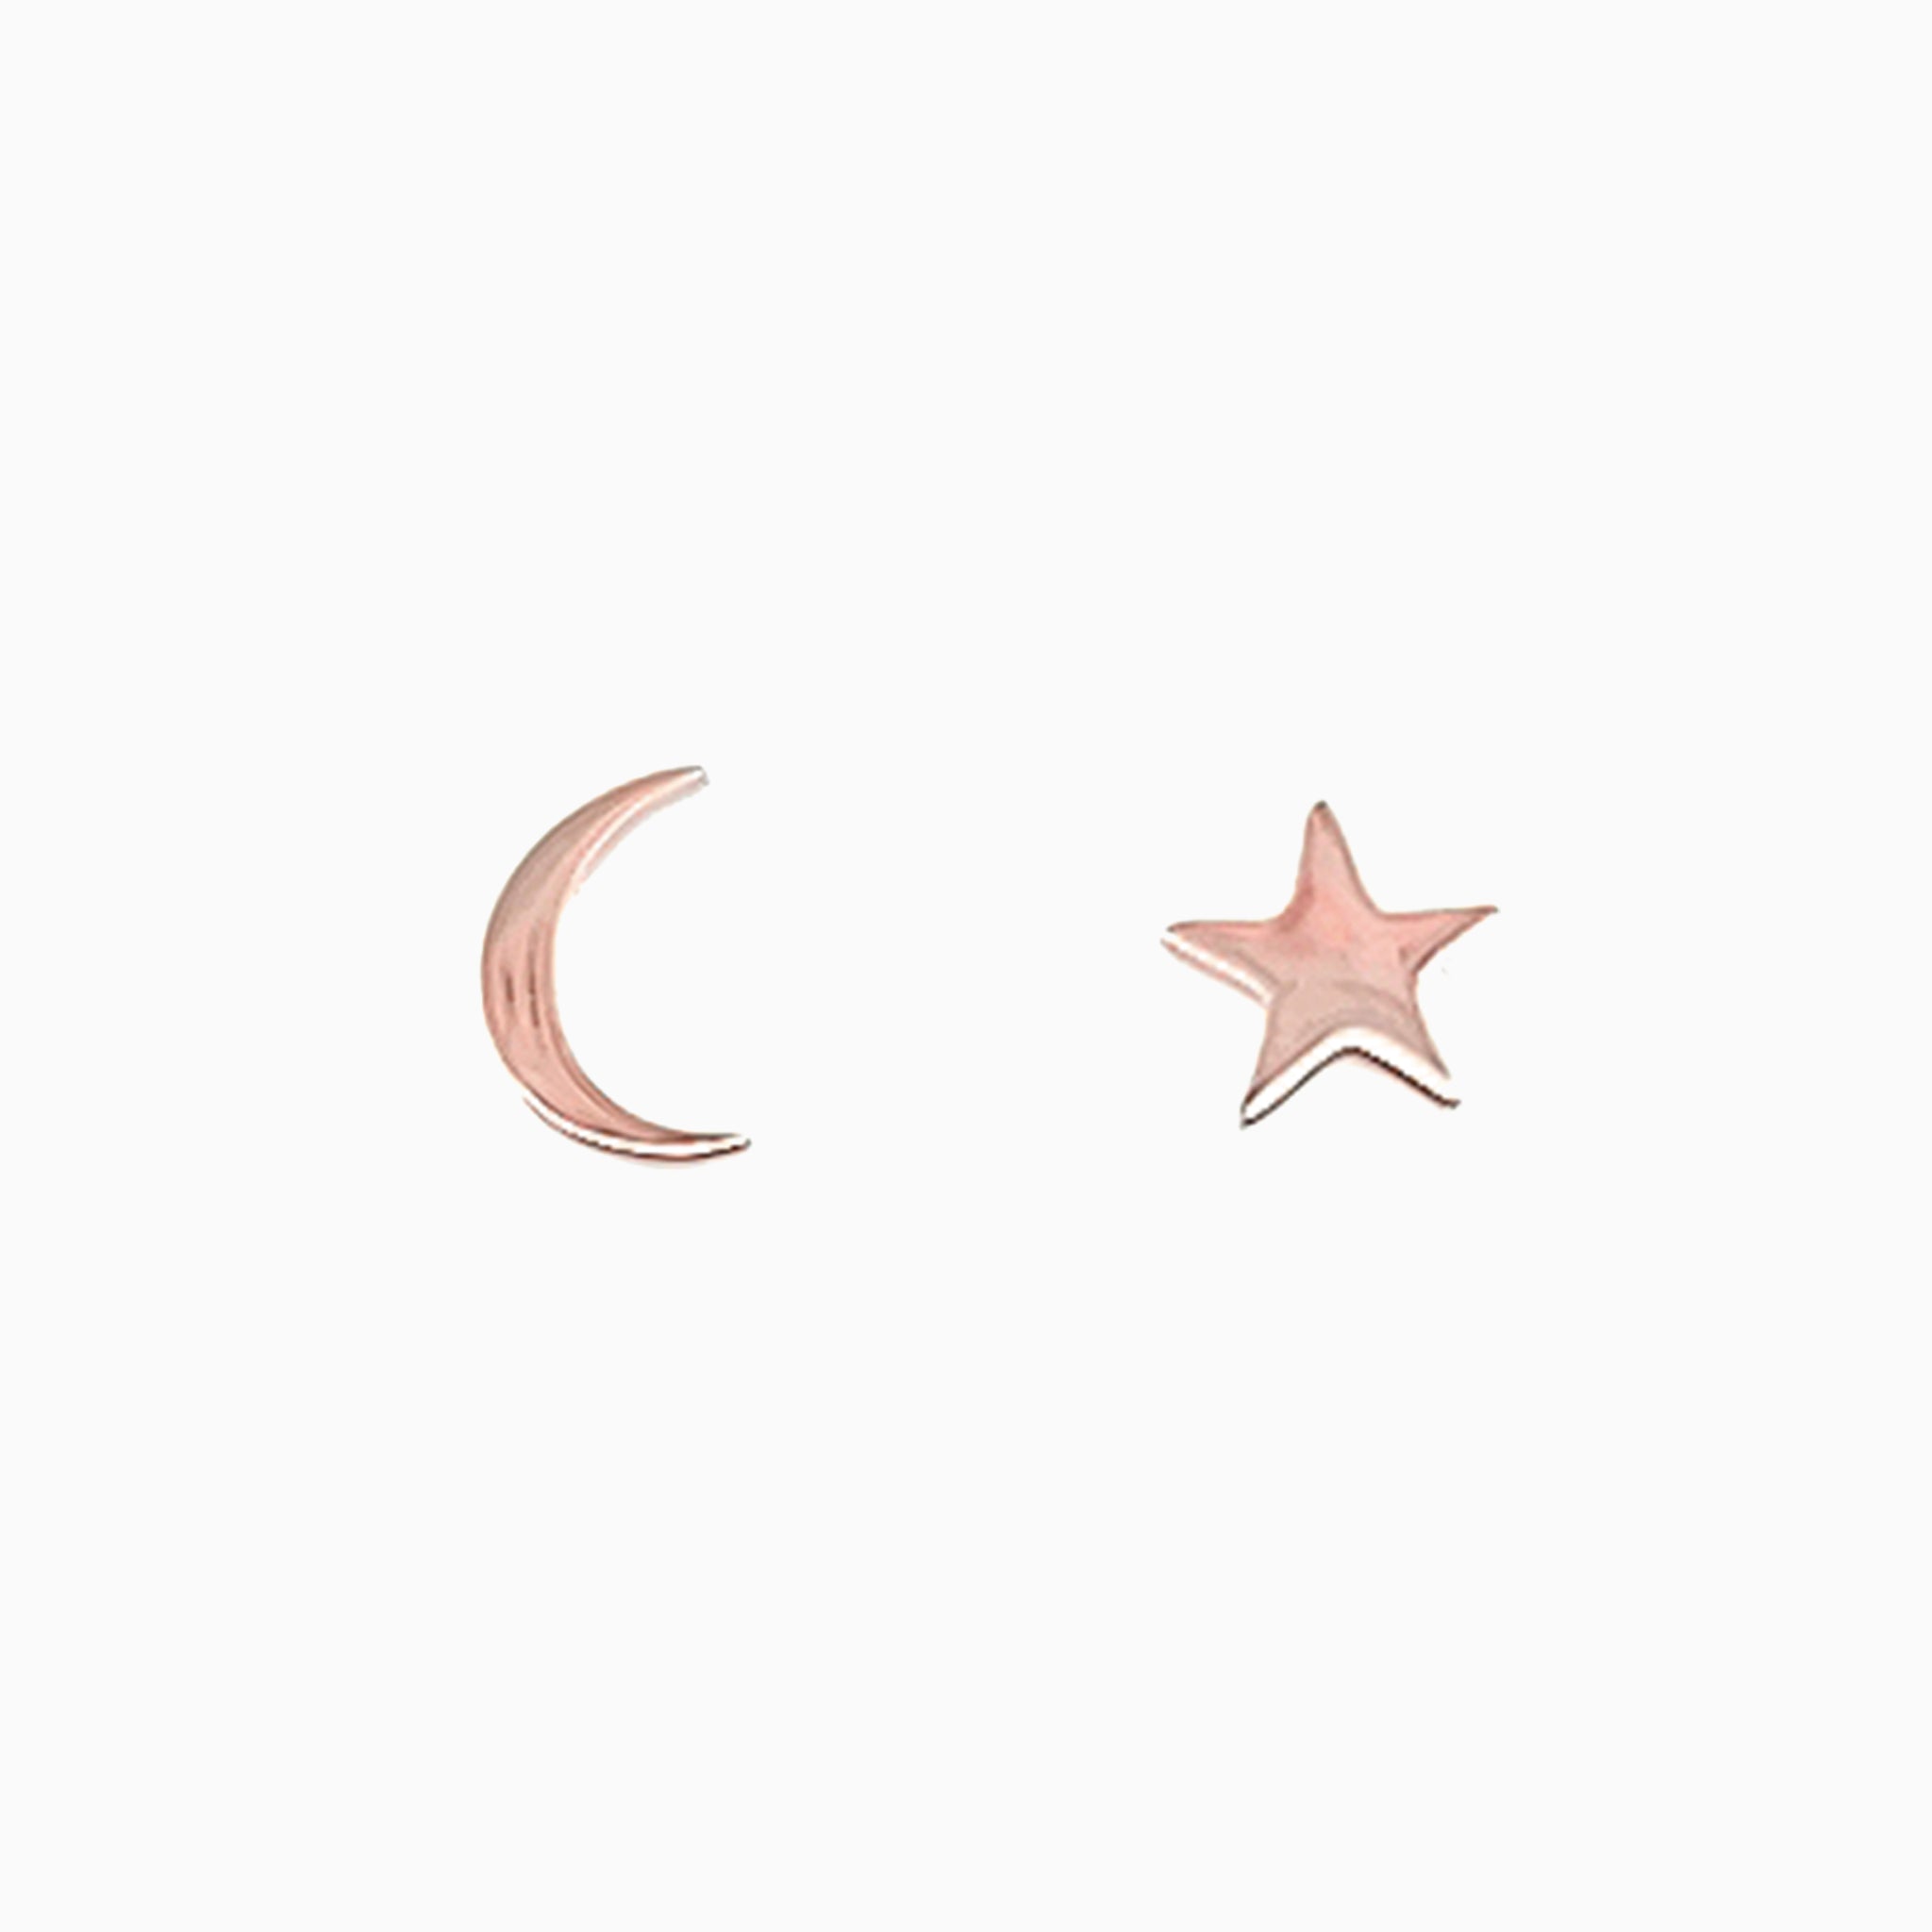 Crystal & Gold Moon Star Earrings | Moon and star earrings, Star earrings  stud, Star earrings